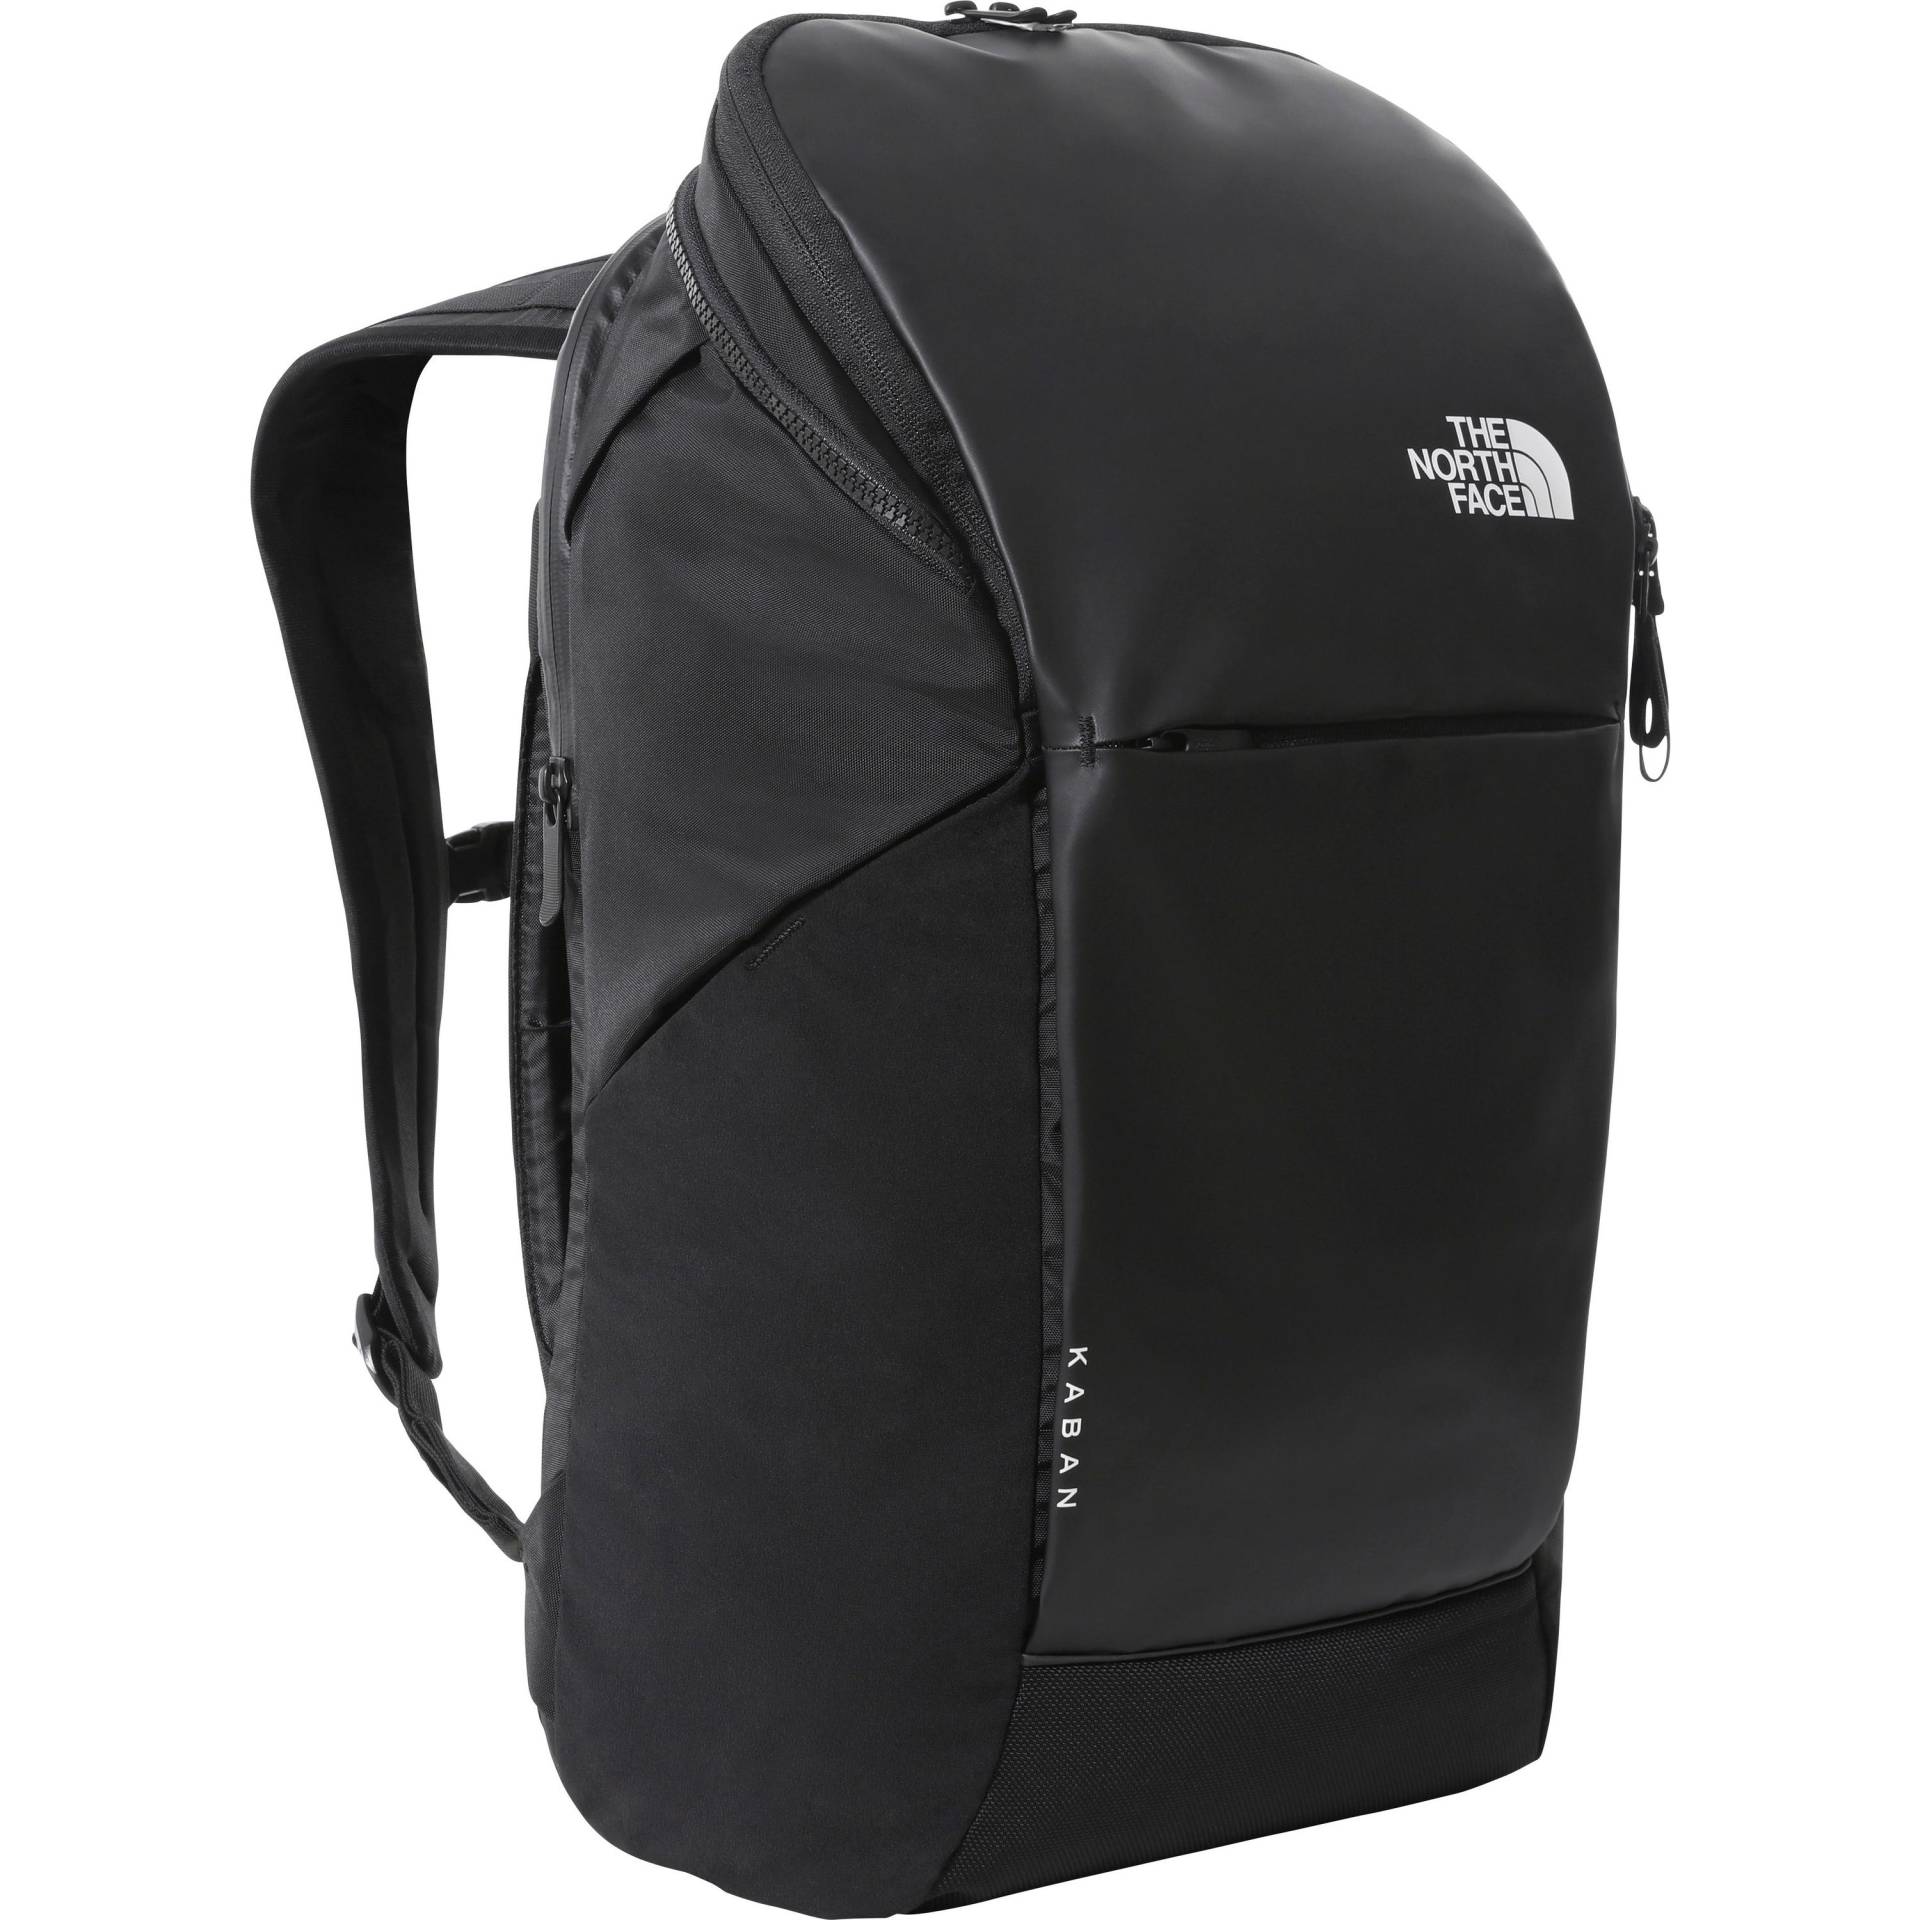 The North Face KABAN 2.0 Daypack von The North Face